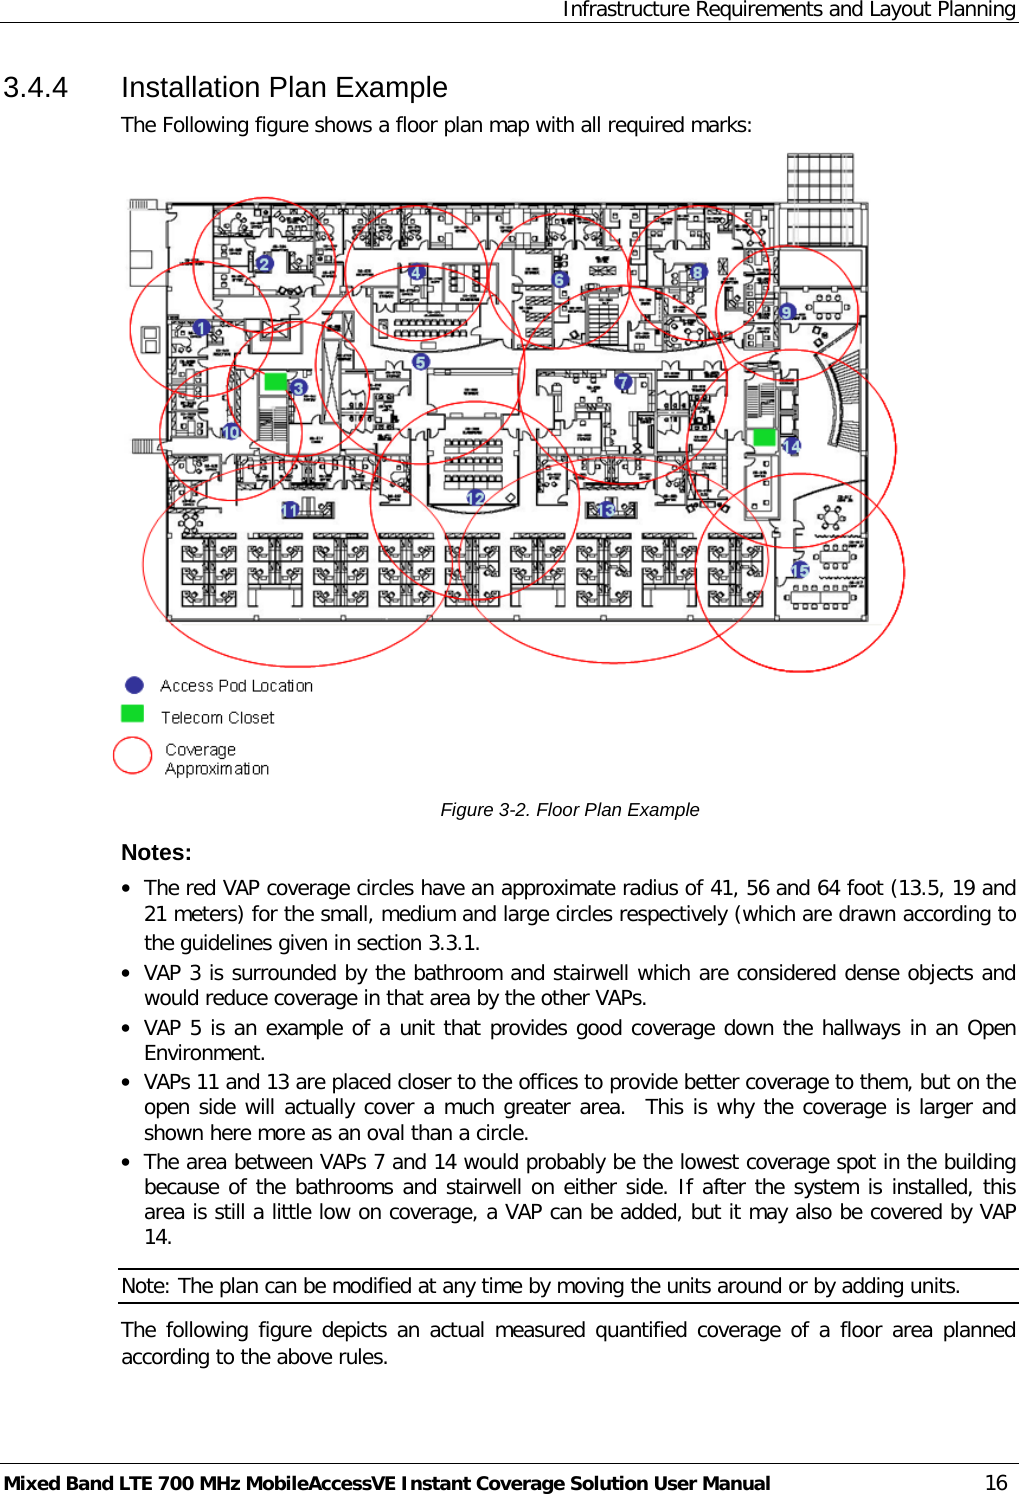 Infrastructure Requirements and Layout Planning Mixed Band LTE 700 MHz MobileAccessVE Instant Coverage Solution User Manual  16 3.4.4  Installation Plan Example The Following figure shows a floor plan map with all required marks:  Figure  3-2. Floor Plan Example Notes: • The red VAP coverage circles have an approximate radius of 41, 56 and 64 foot (13.5, 19 and 21 meters) for the small, medium and large circles respectively (which are drawn according to the guidelines given in section  3.3.1.  • VAP 3 is surrounded by the bathroom and stairwell which are considered dense objects and would reduce coverage in that area by the other VAPs. • VAP 5 is an example of a unit that provides good coverage down the hallways in an Open Environment. • VAPs 11 and 13 are placed closer to the offices to provide better coverage to them, but on the open side will actually cover a much greater area.  This is why the coverage is larger and shown here more as an oval than a circle. • The area between VAPs 7 and 14 would probably be the lowest coverage spot in the building because of the bathrooms and stairwell on either side. If after the system is installed, this area is still a little low on coverage, a VAP can be added, but it may also be covered by VAP 14. Note: The plan can be modified at any time by moving the units around or by adding units. The following figure depicts an actual measured quantified coverage of a floor area planned according to the above rules.  